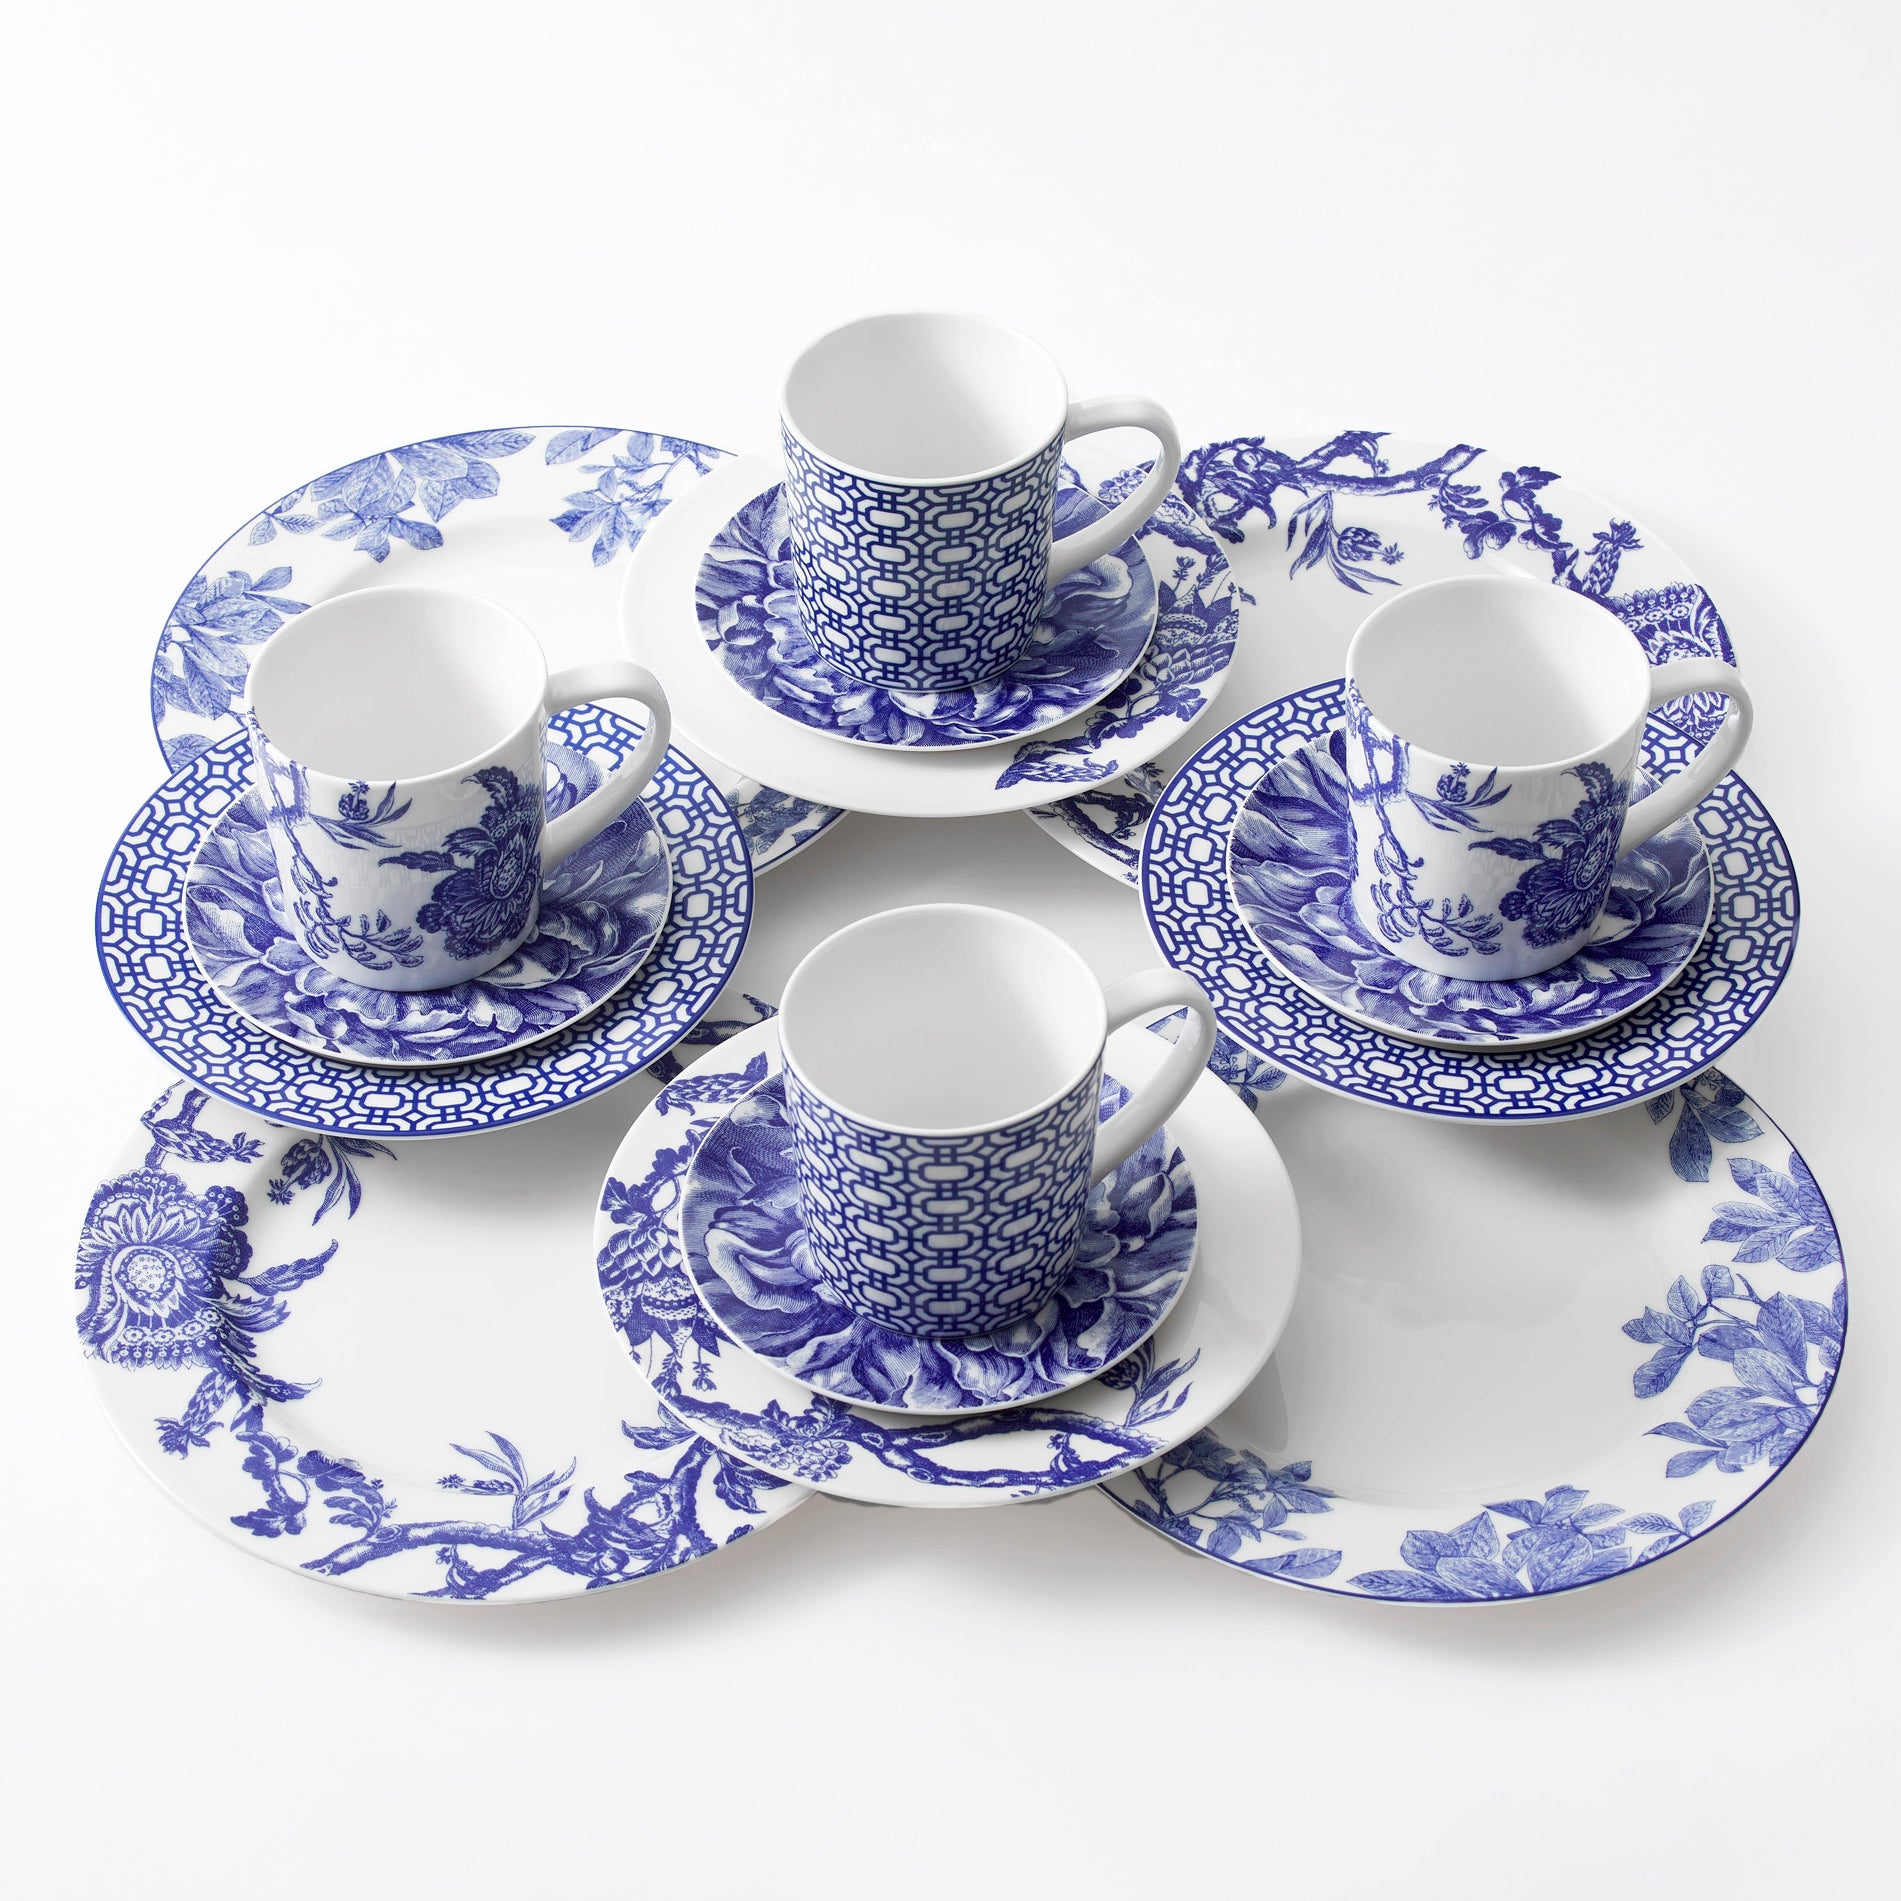 Romantic mixed botanical 16 piece dinnerware set in blue and white porcelain from Caskata.